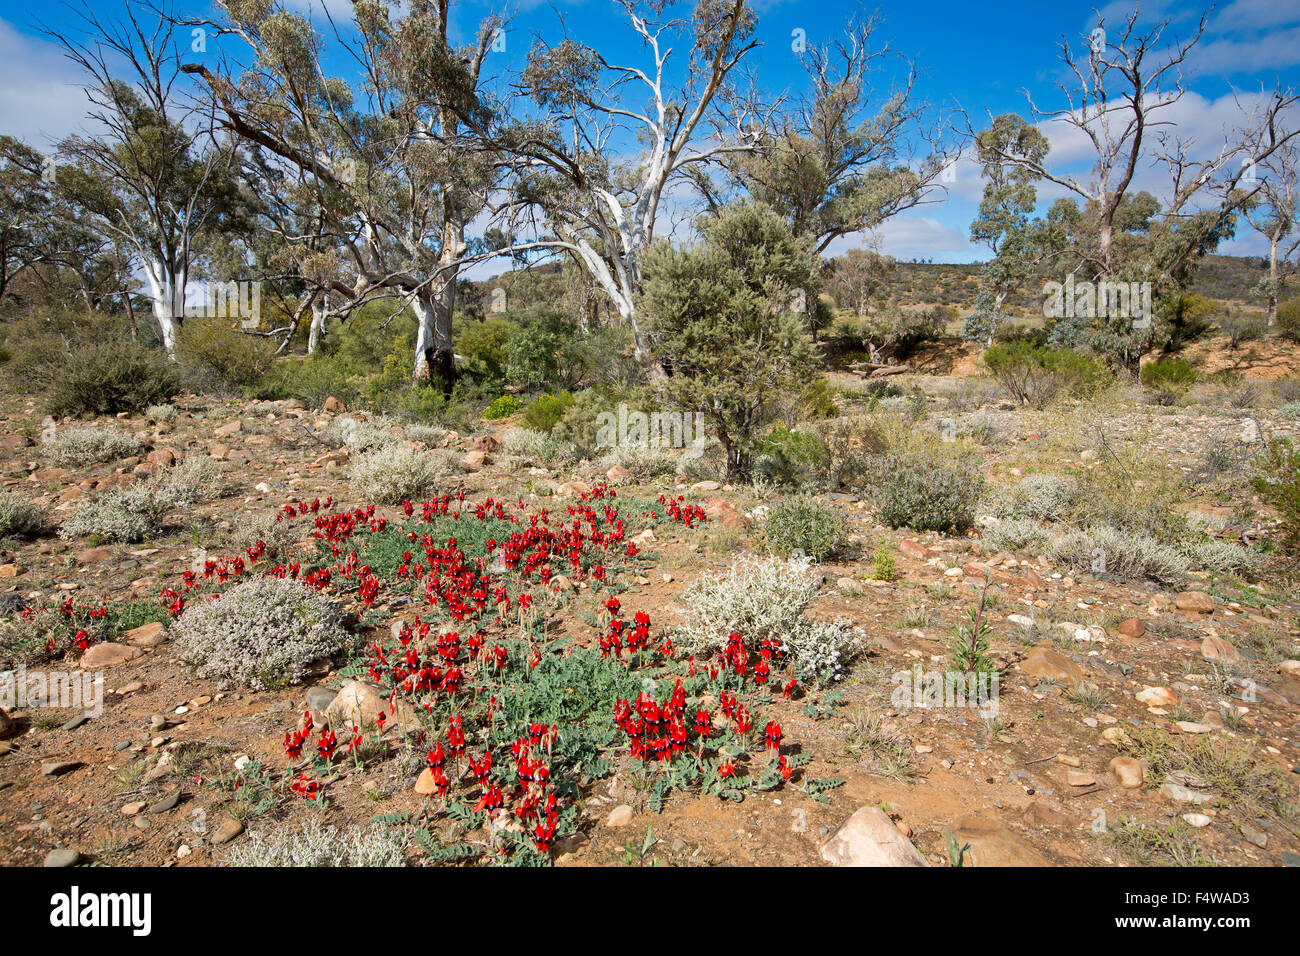 Colourful landscape in outback Australia with carpet of red flowers of Sturt's desert pea, Swainsona formosa & gum trees under blue sky Stock Photo